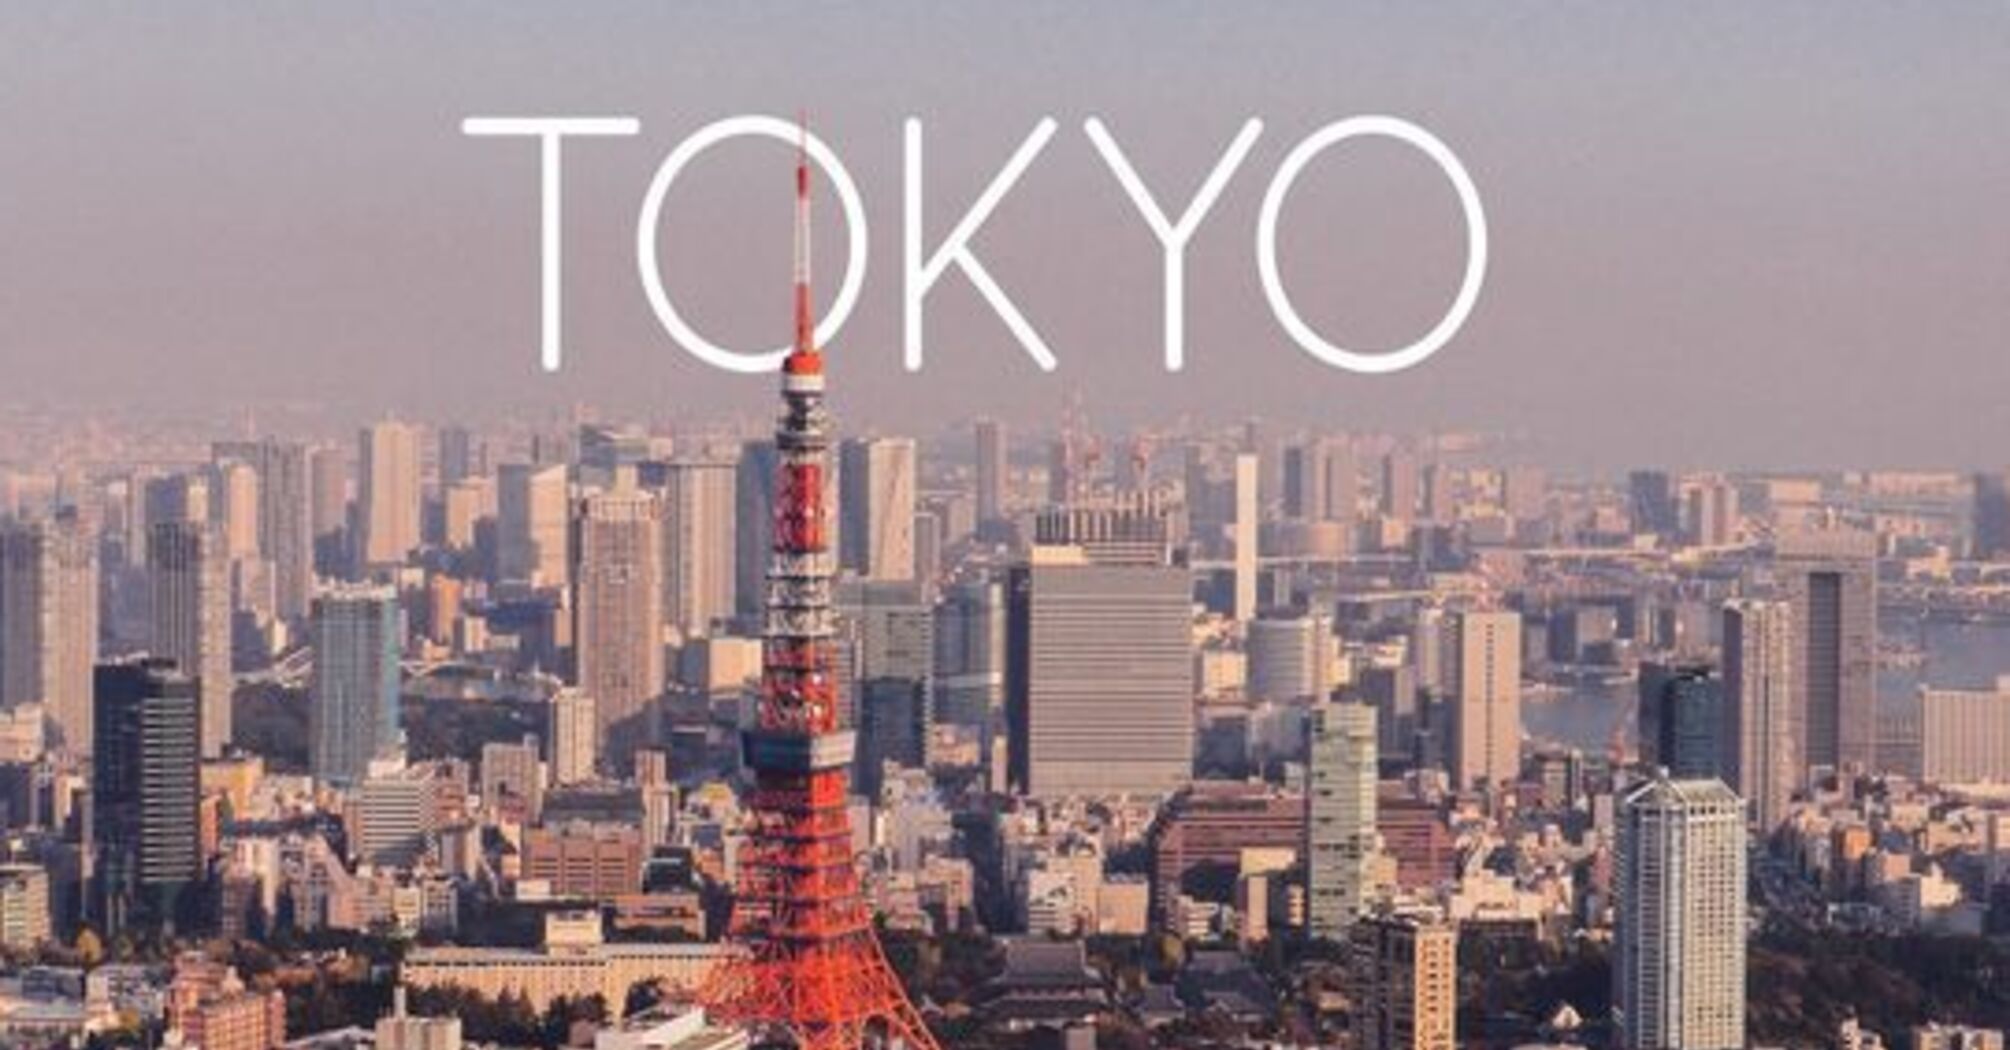 Ignoring rules and stereotypes about Asians: 14 mistakes tourists make in Tokyo